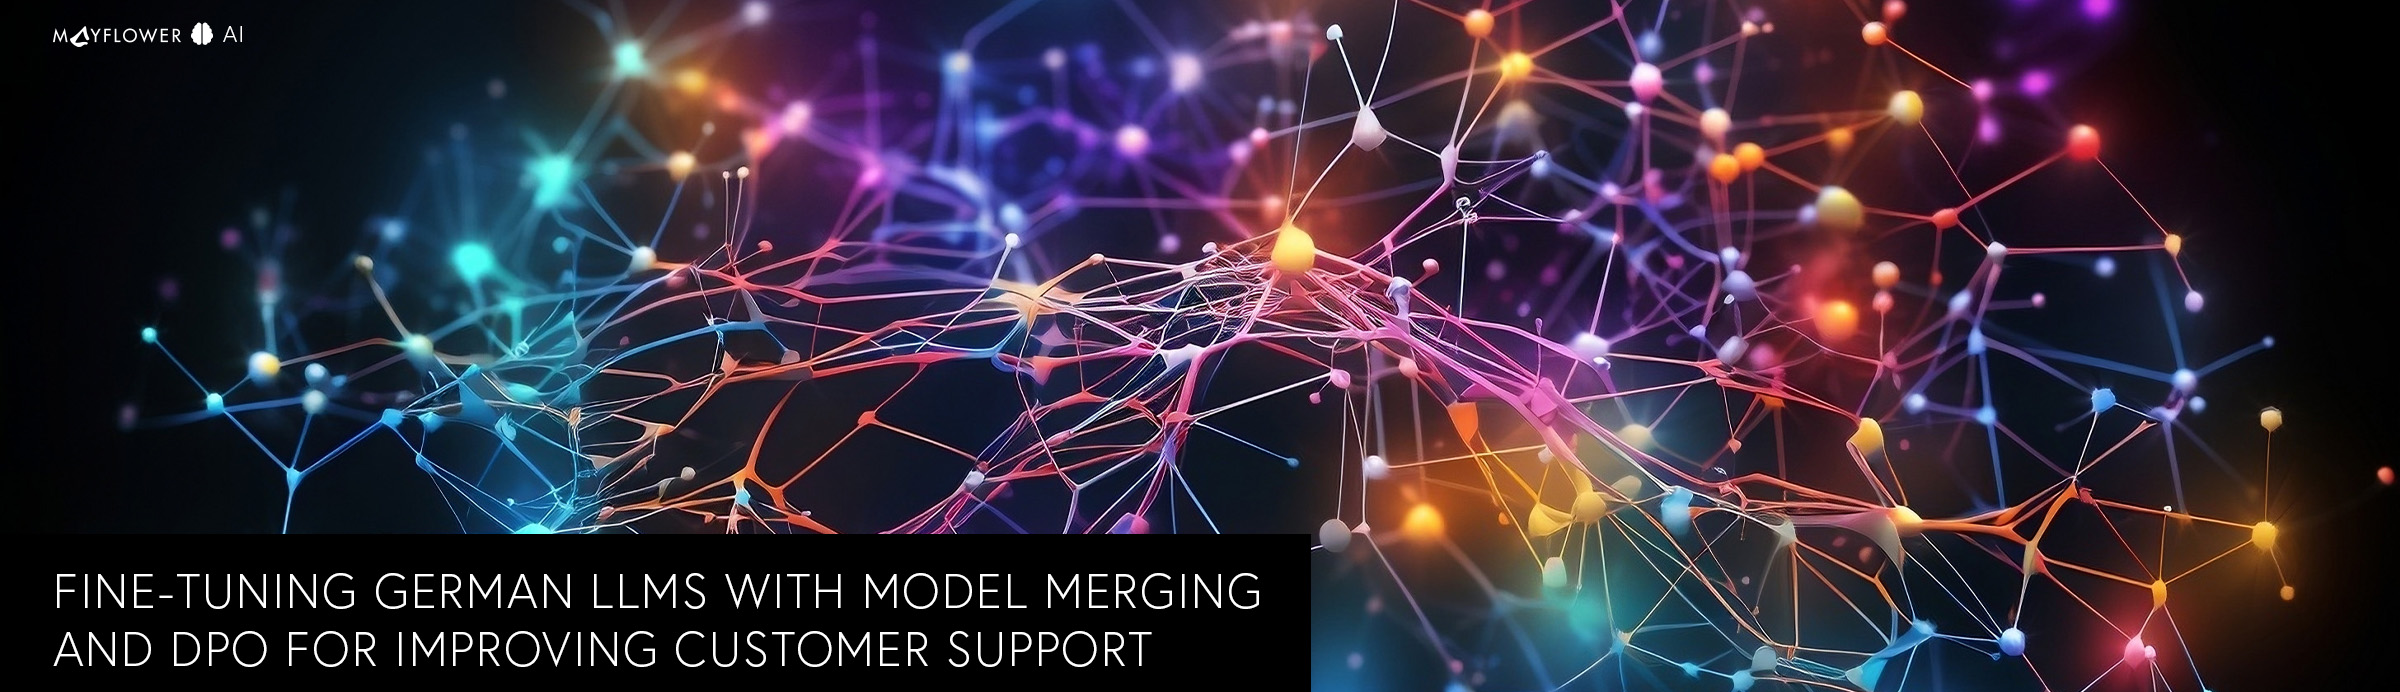 Fine-tuning German LLMs with Model Merging and DPO for Improving Customer Support